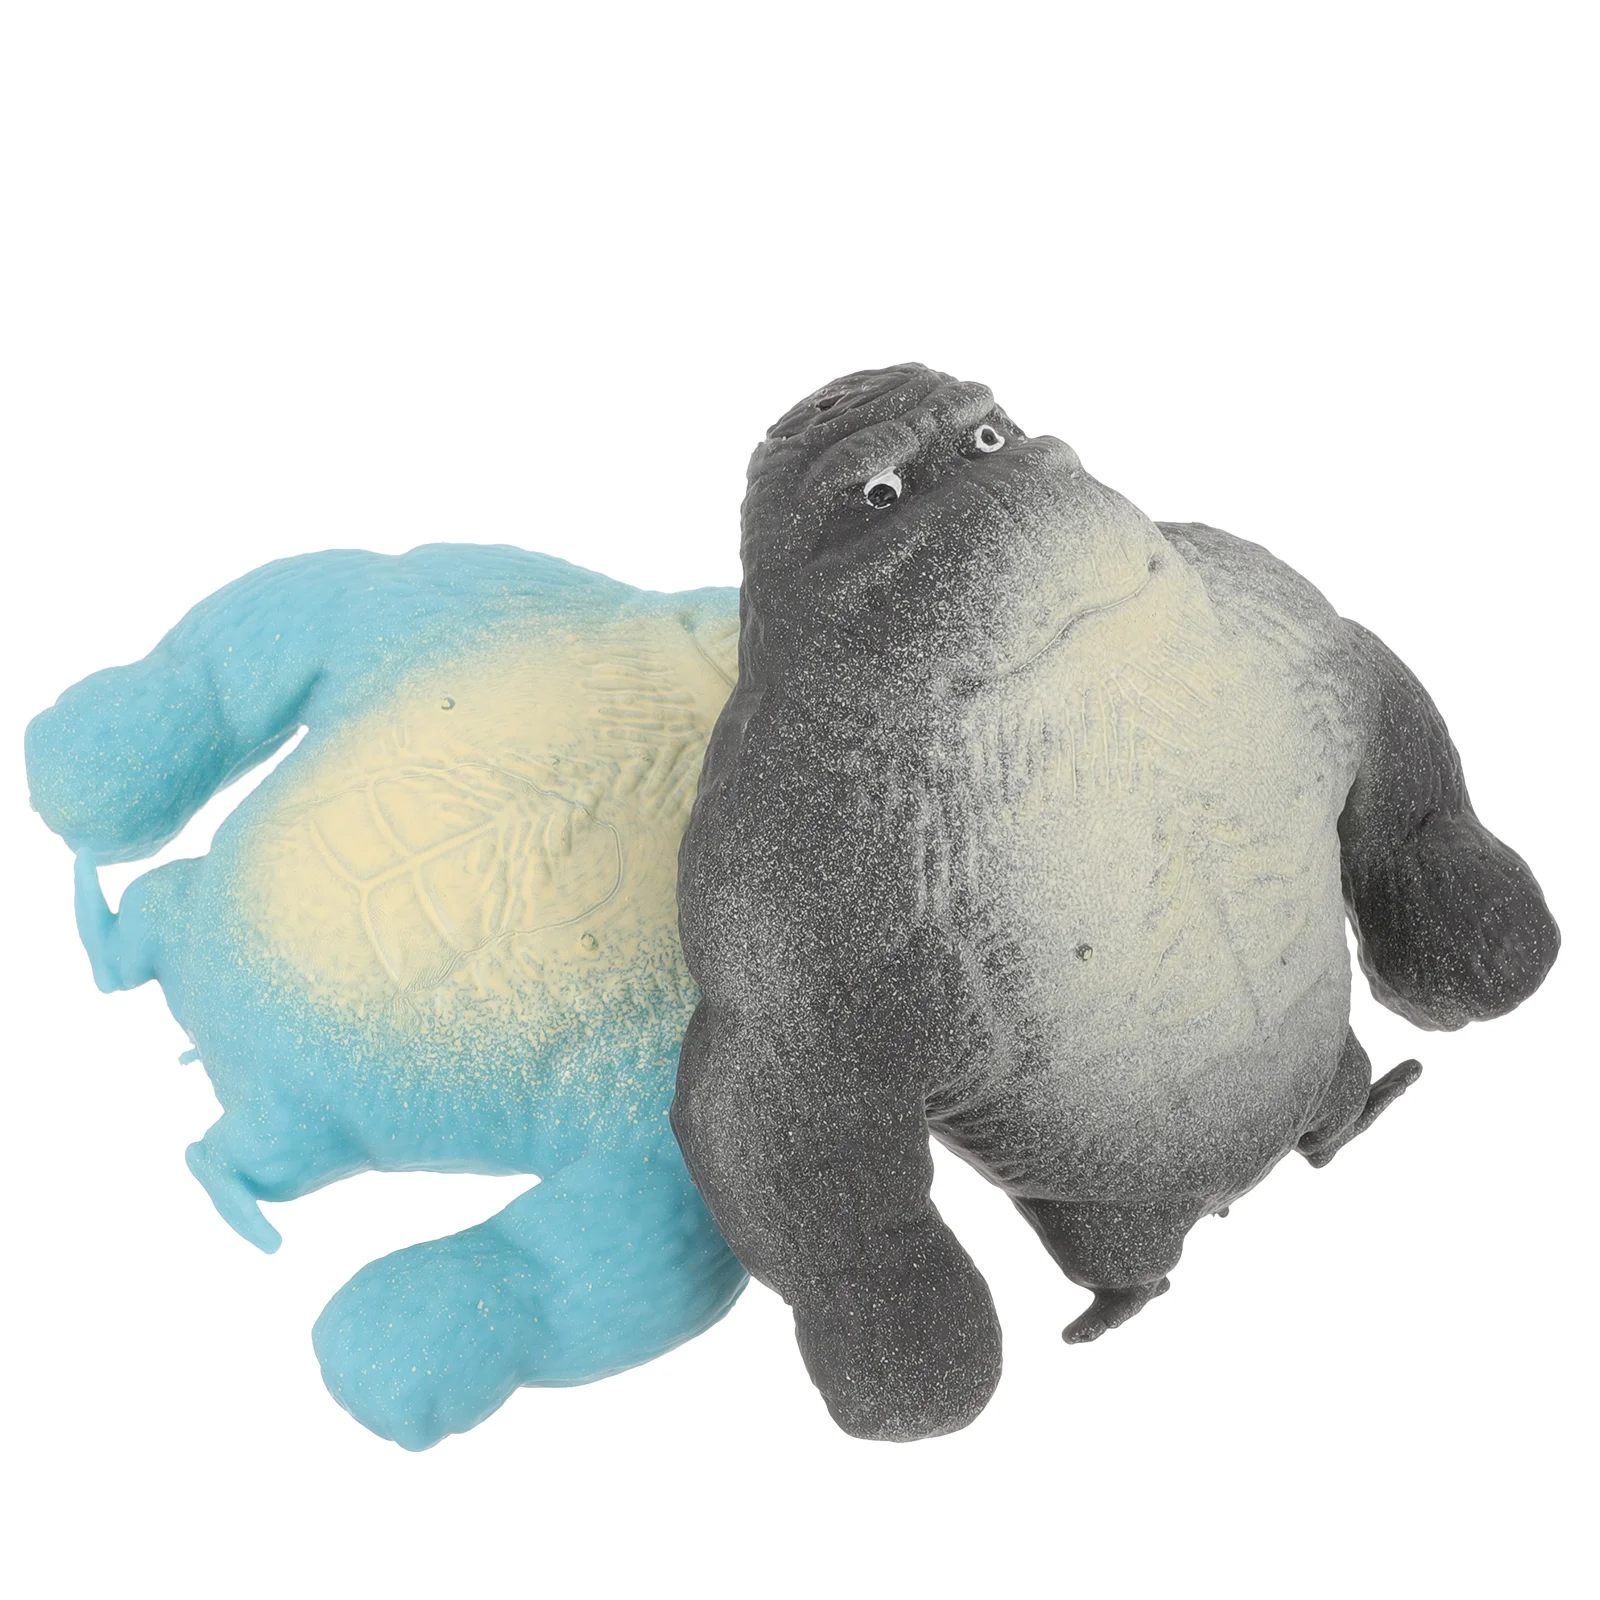 

2pcs Durable Squeeze Toys Stress Reducing Gifts Decompression Stretchy Gorilla Toys